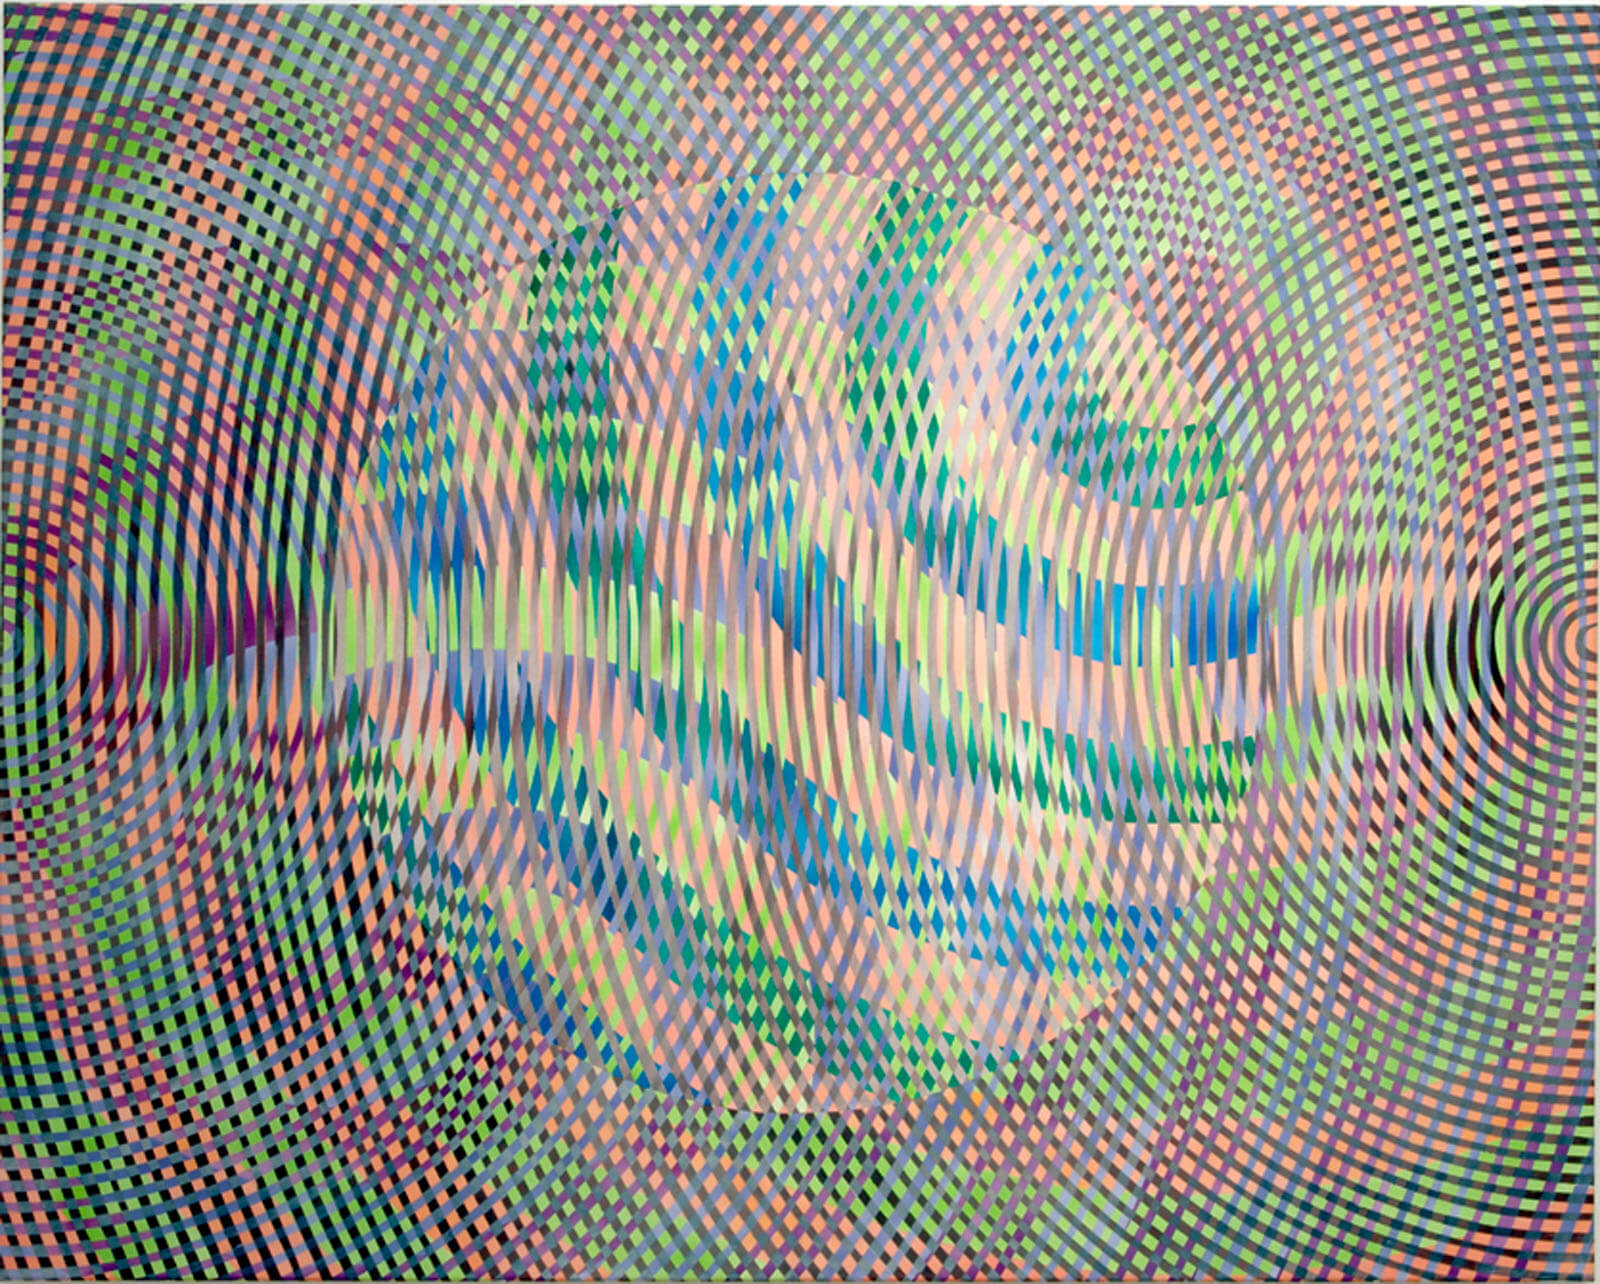 sonic-no.15-oil-and-acrylic-on-canvas-97-x-122-cm-2008